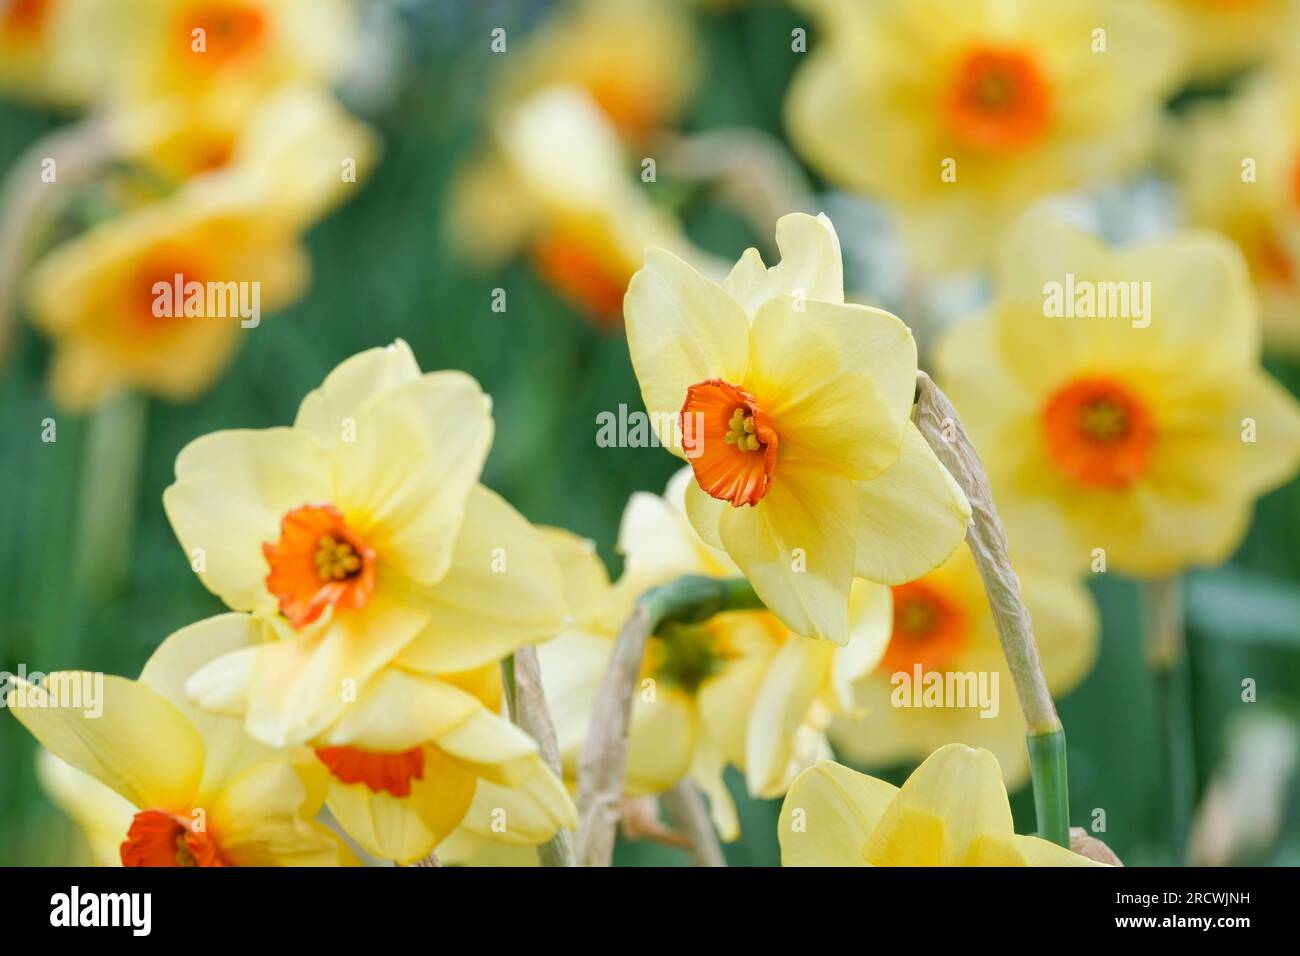 Narcissus Altruist, daffodil Altruist, small cupped narcissus, orange-red cup, surrounded by yellow petals Stock Photo